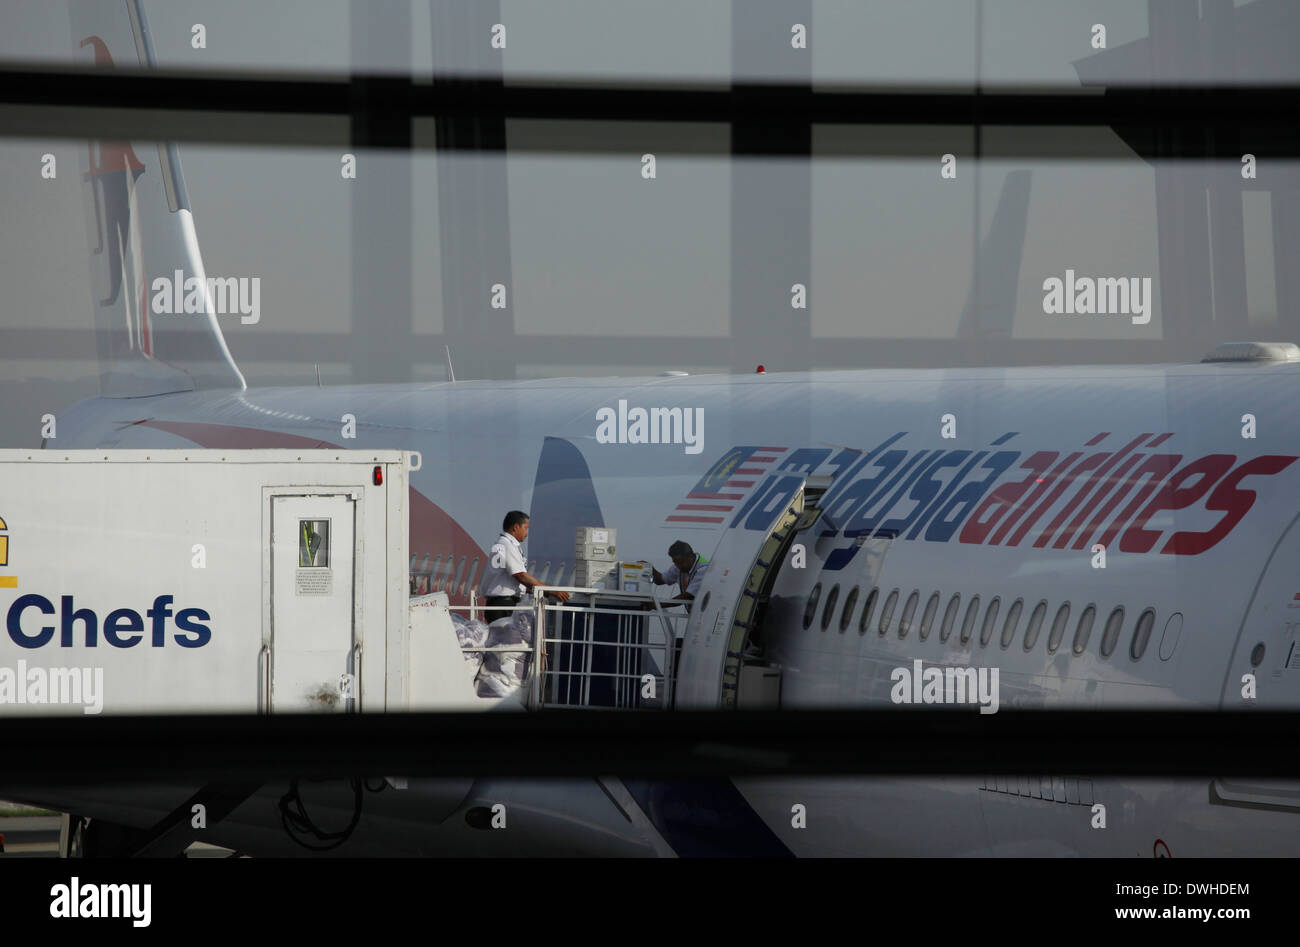 Malaysia Airlines airplane at Kuala Lumpur airport in Malaysia Stock Photo